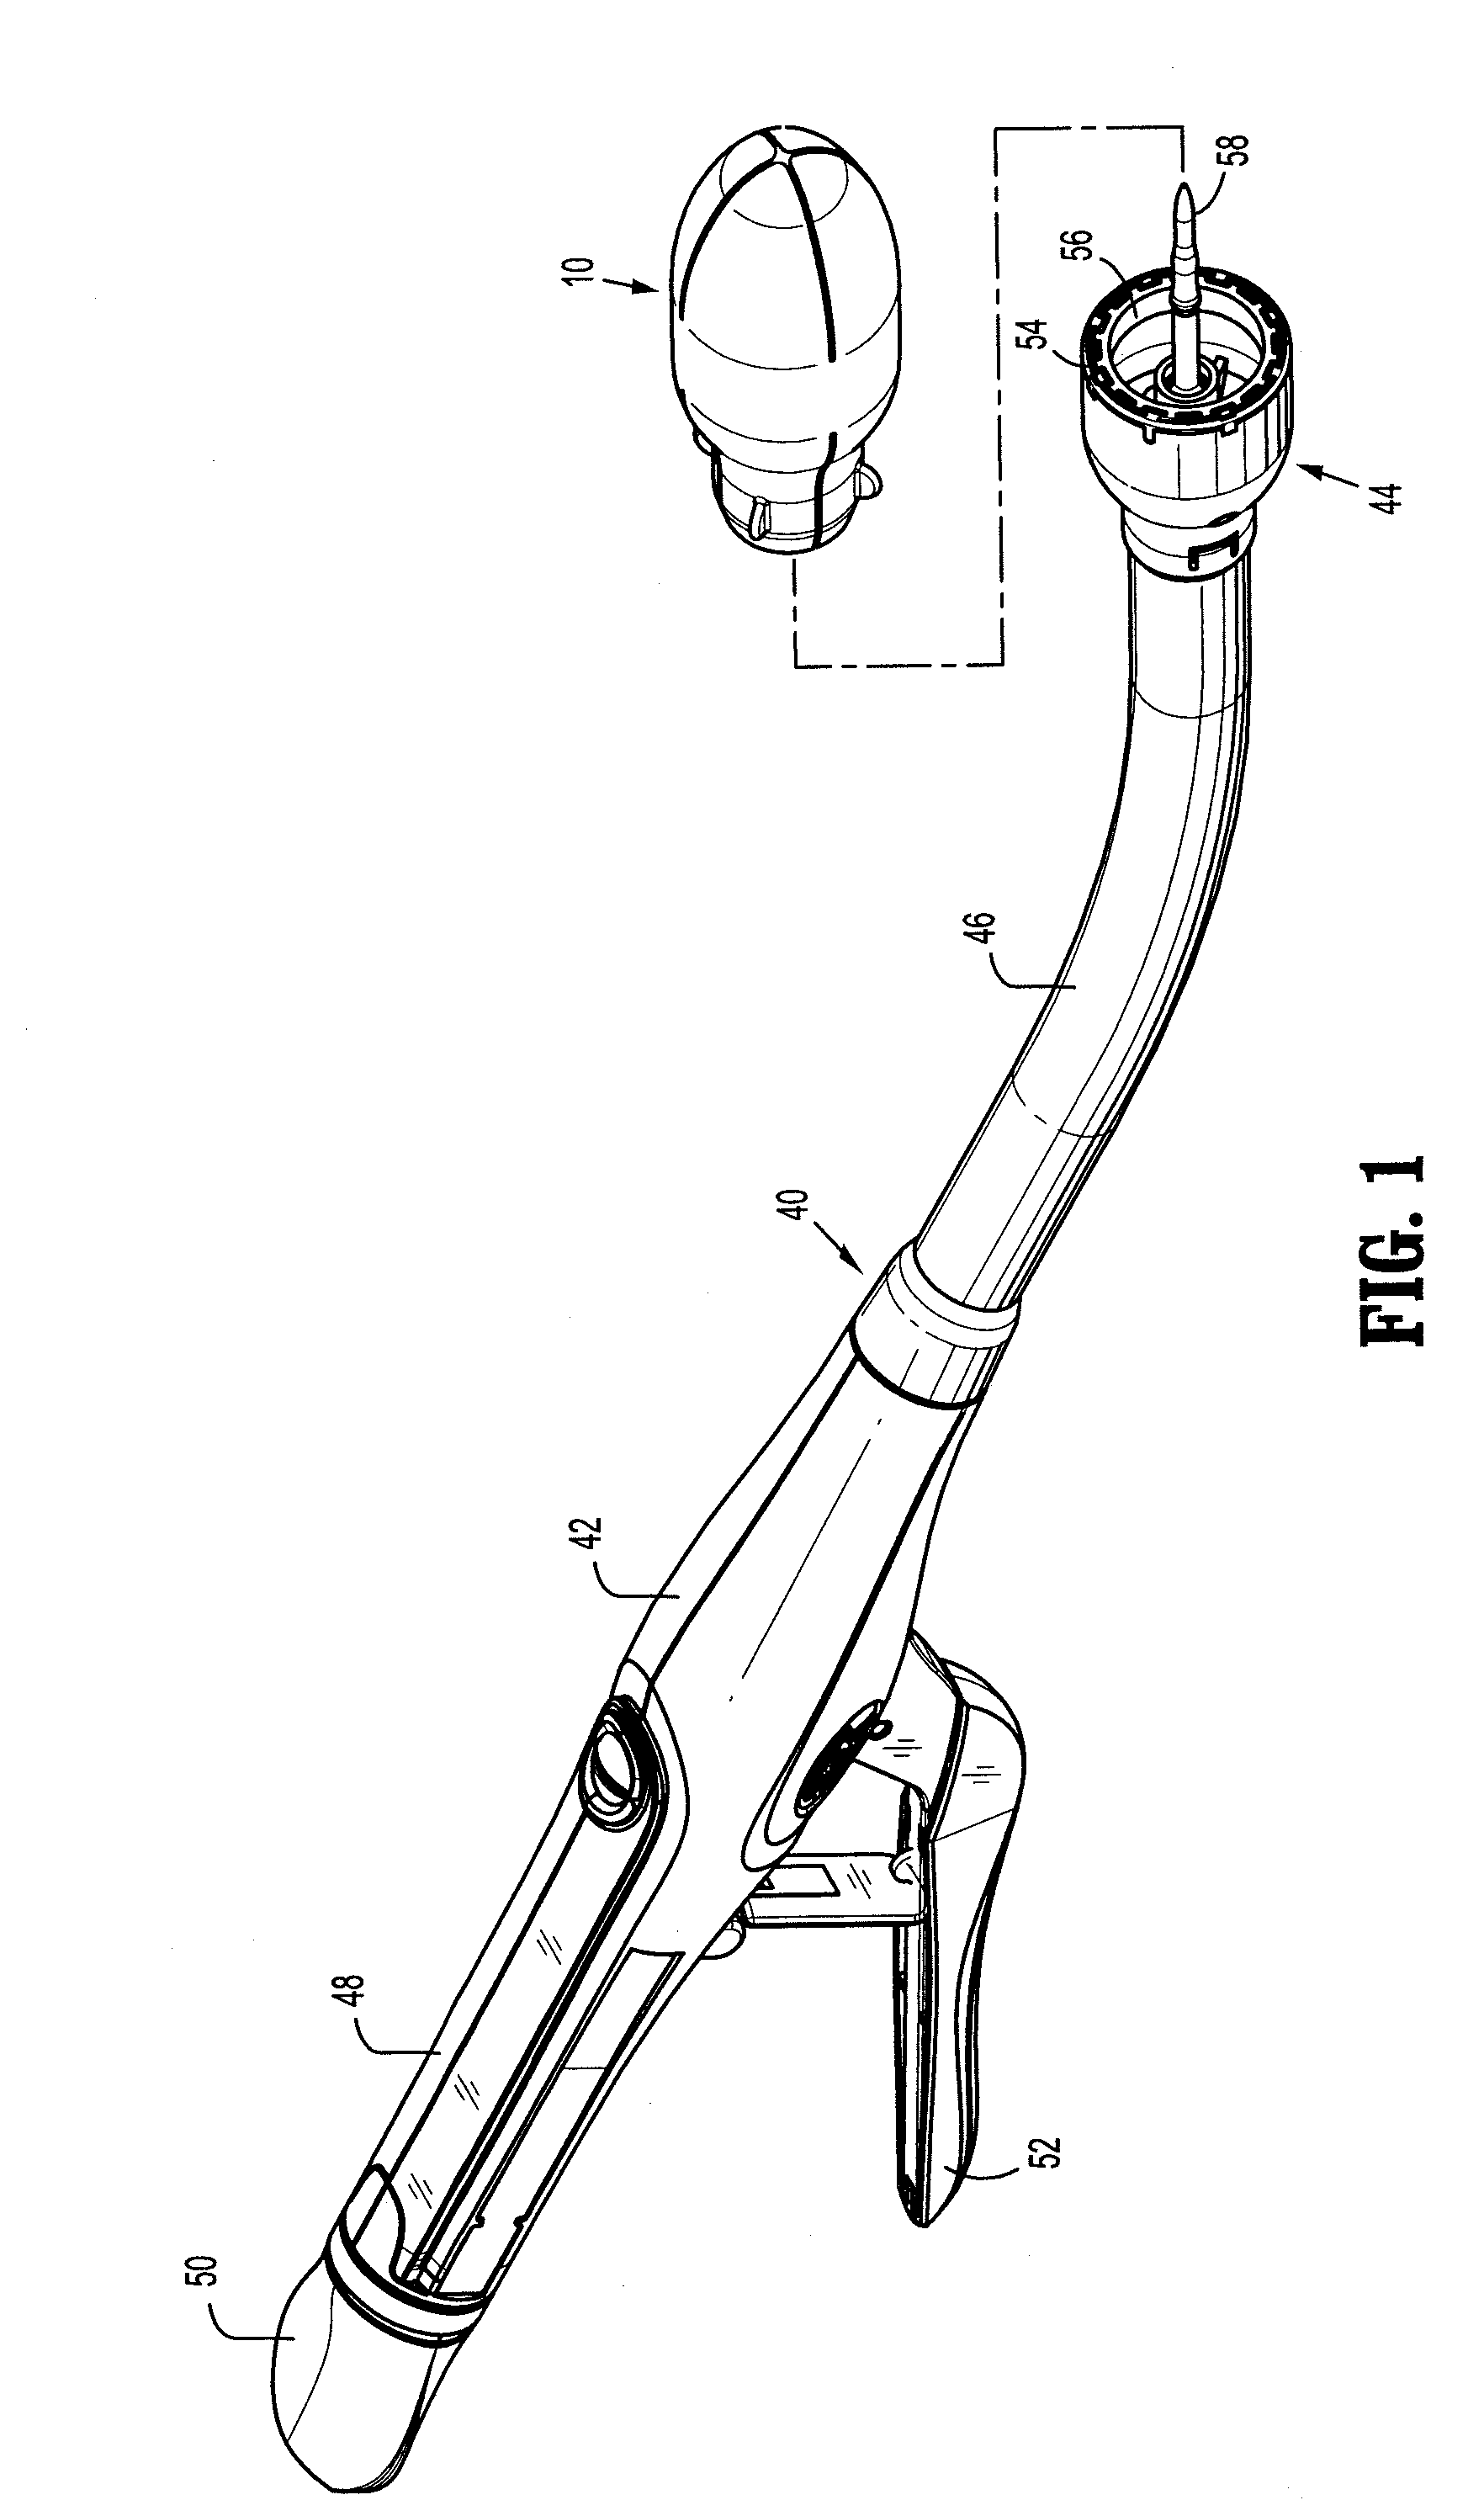 Insertion Shroud for Surgical Instrument